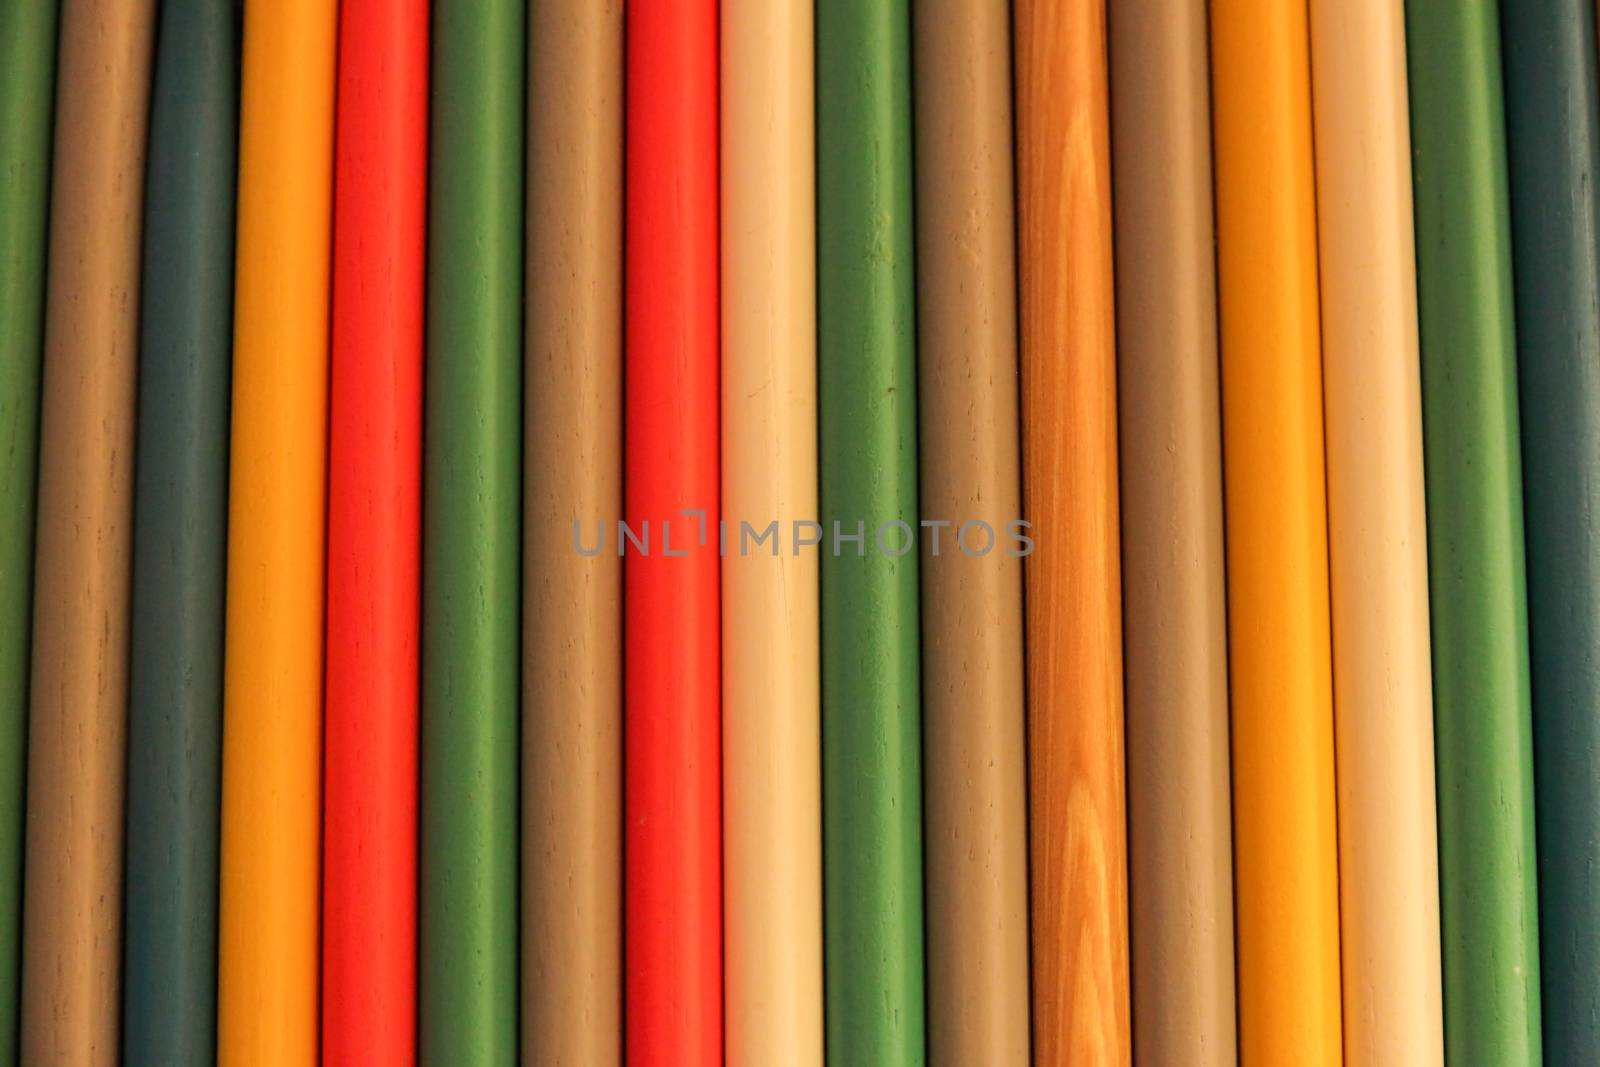 Close up of colored wooden drum sticks arranged in a row